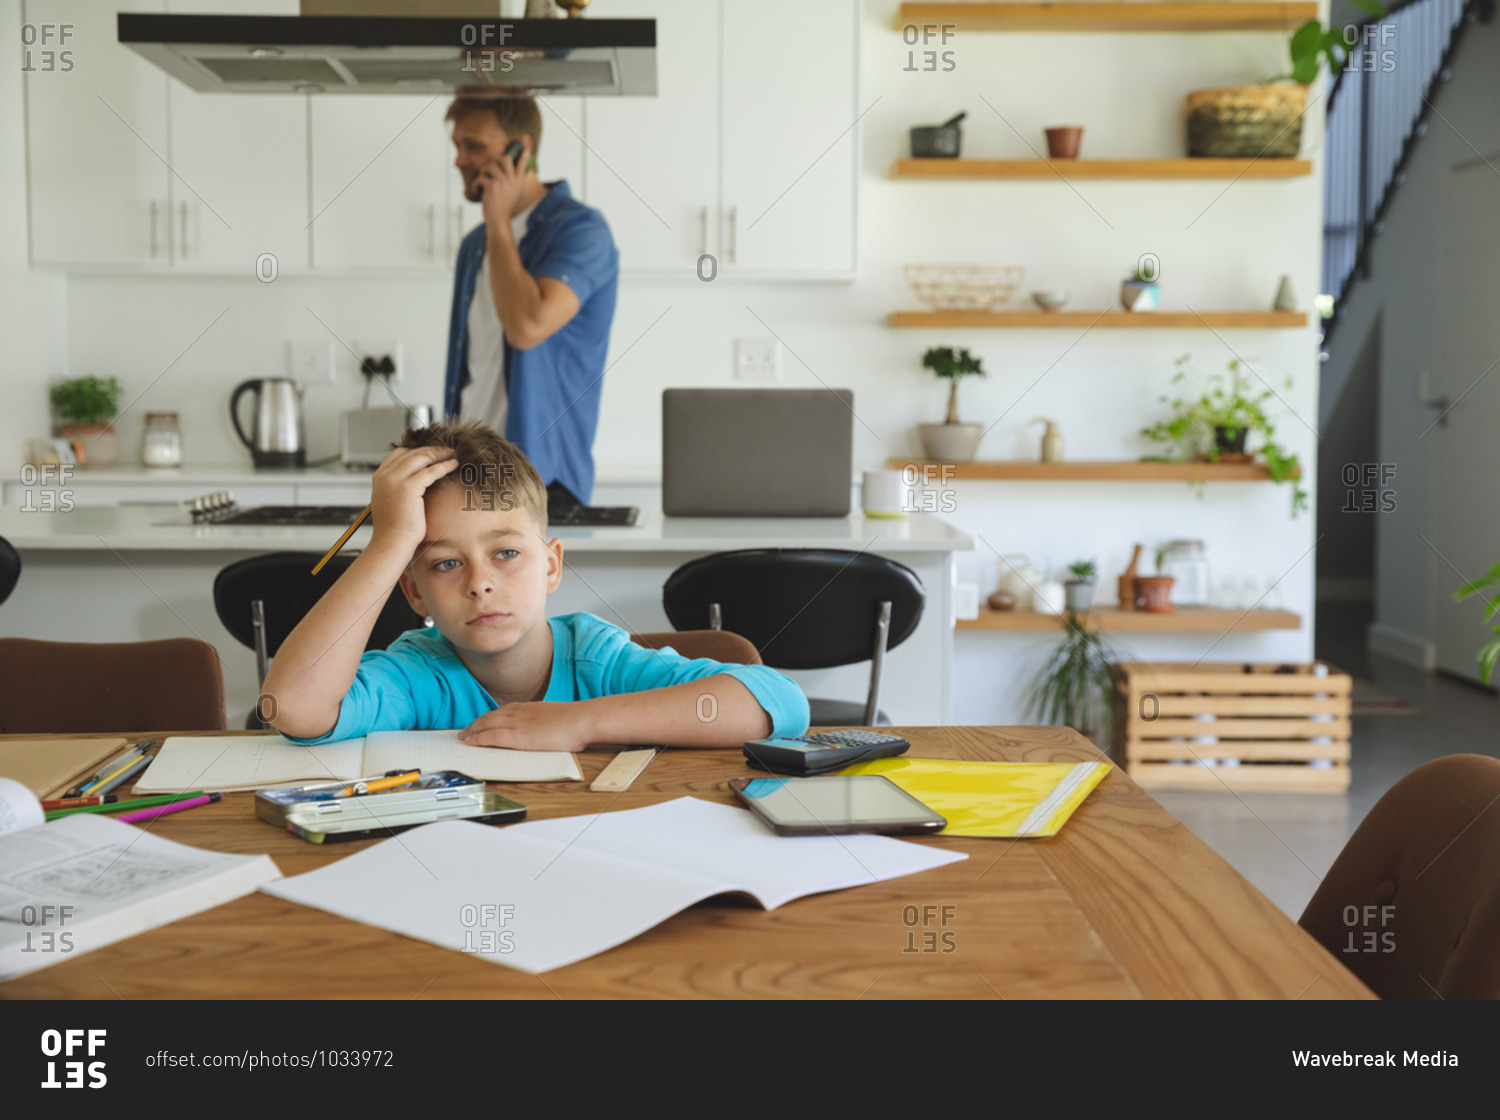 Caucasian man at home with his son together, in kitchen, boy doing homework at table, thinking. Social distancing during Covid 19 Coronavirus quarantine lockdown.